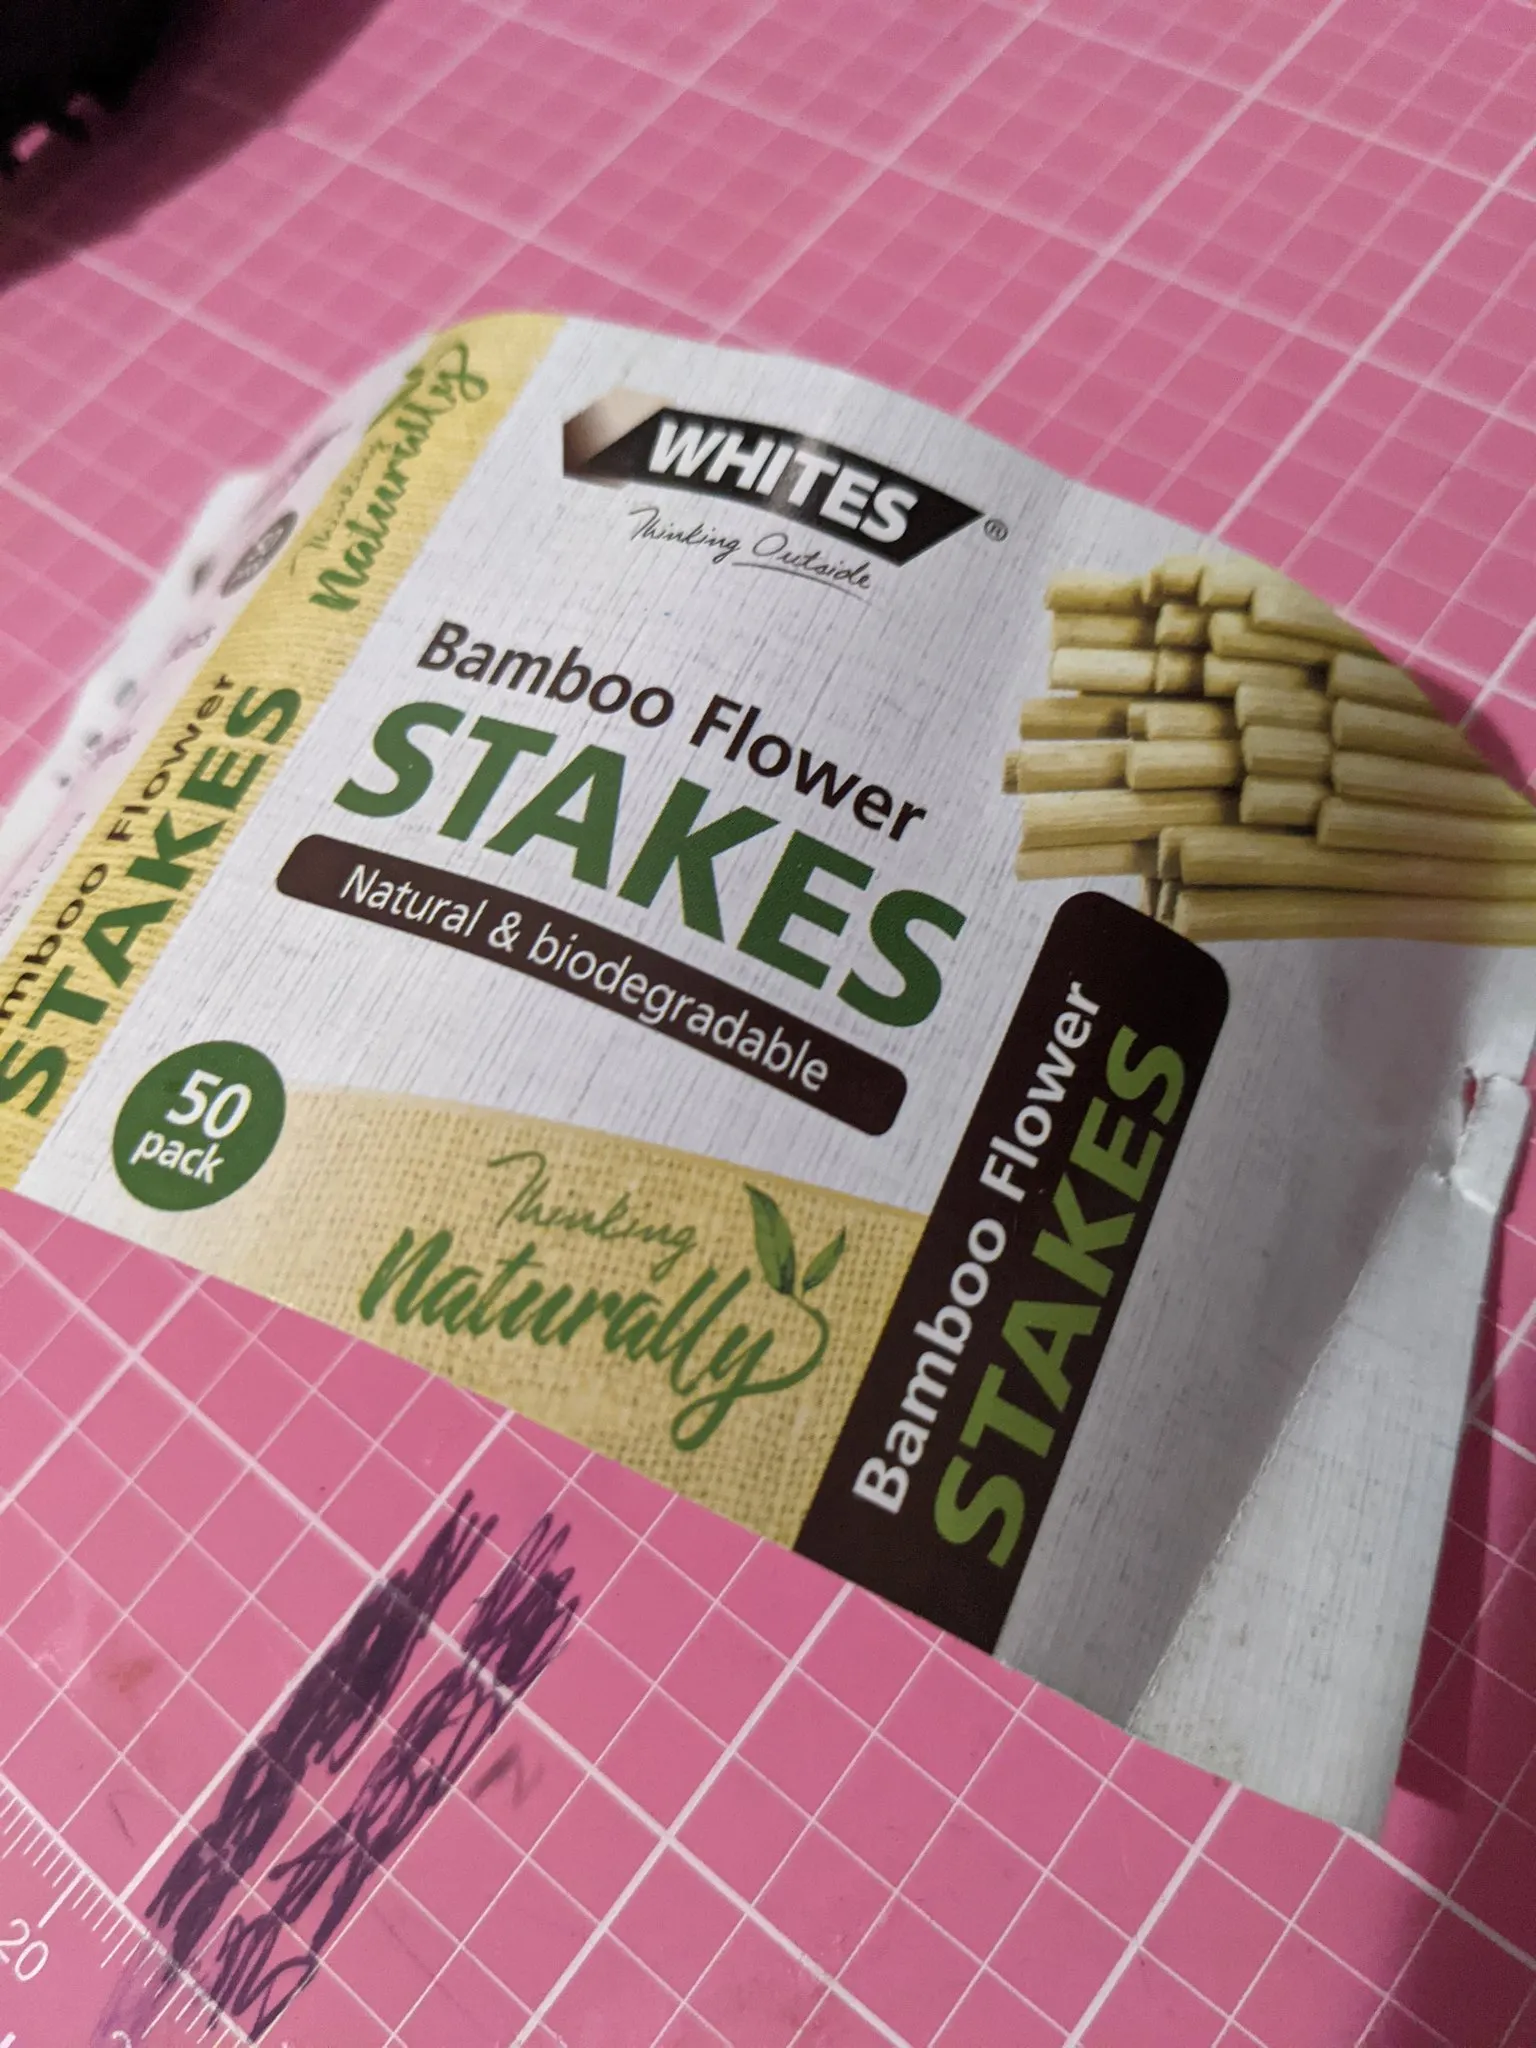 Using bamboo flower stakes from Bunnings as the sticks